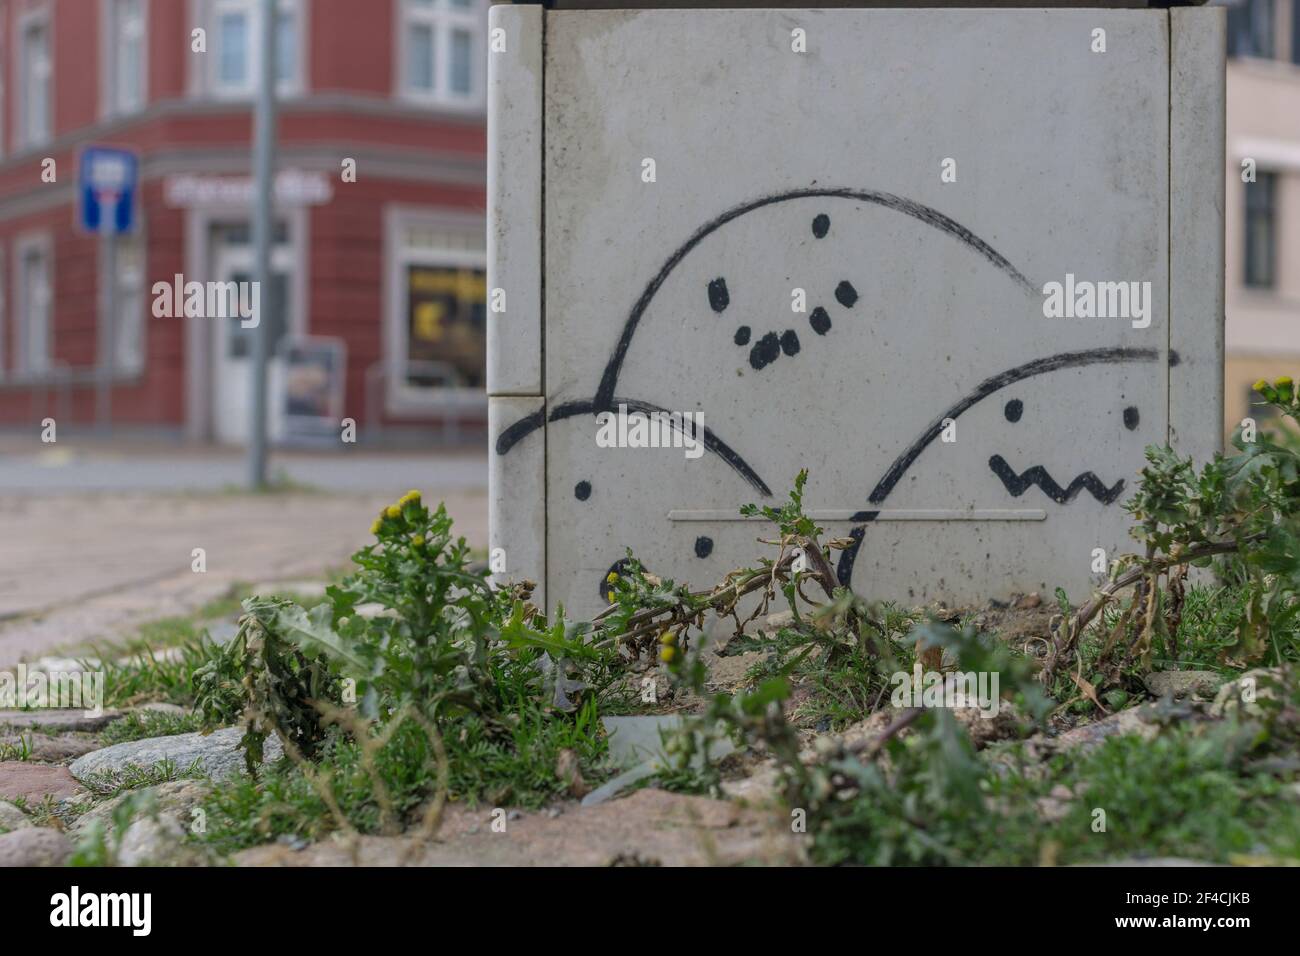 Electricity box with egg-shaped smiles at a street intersection Stock Photo